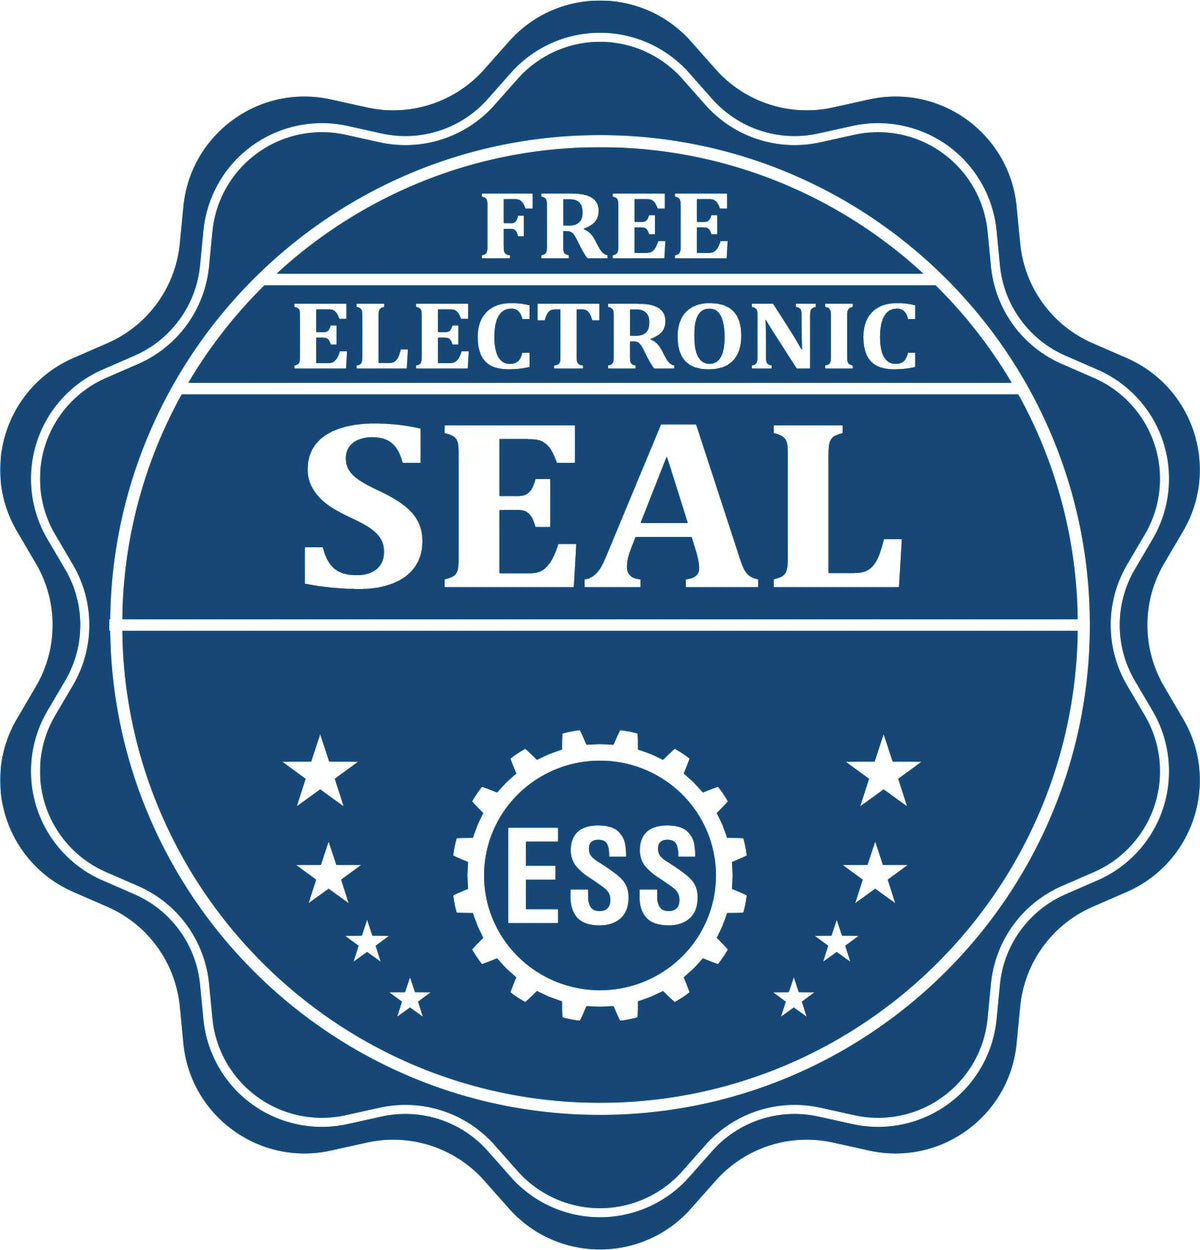 A badge showing a free electronic seal for the Hybrid Indiana Land Surveyor Seal with stars and the ESS gear on the emblem.